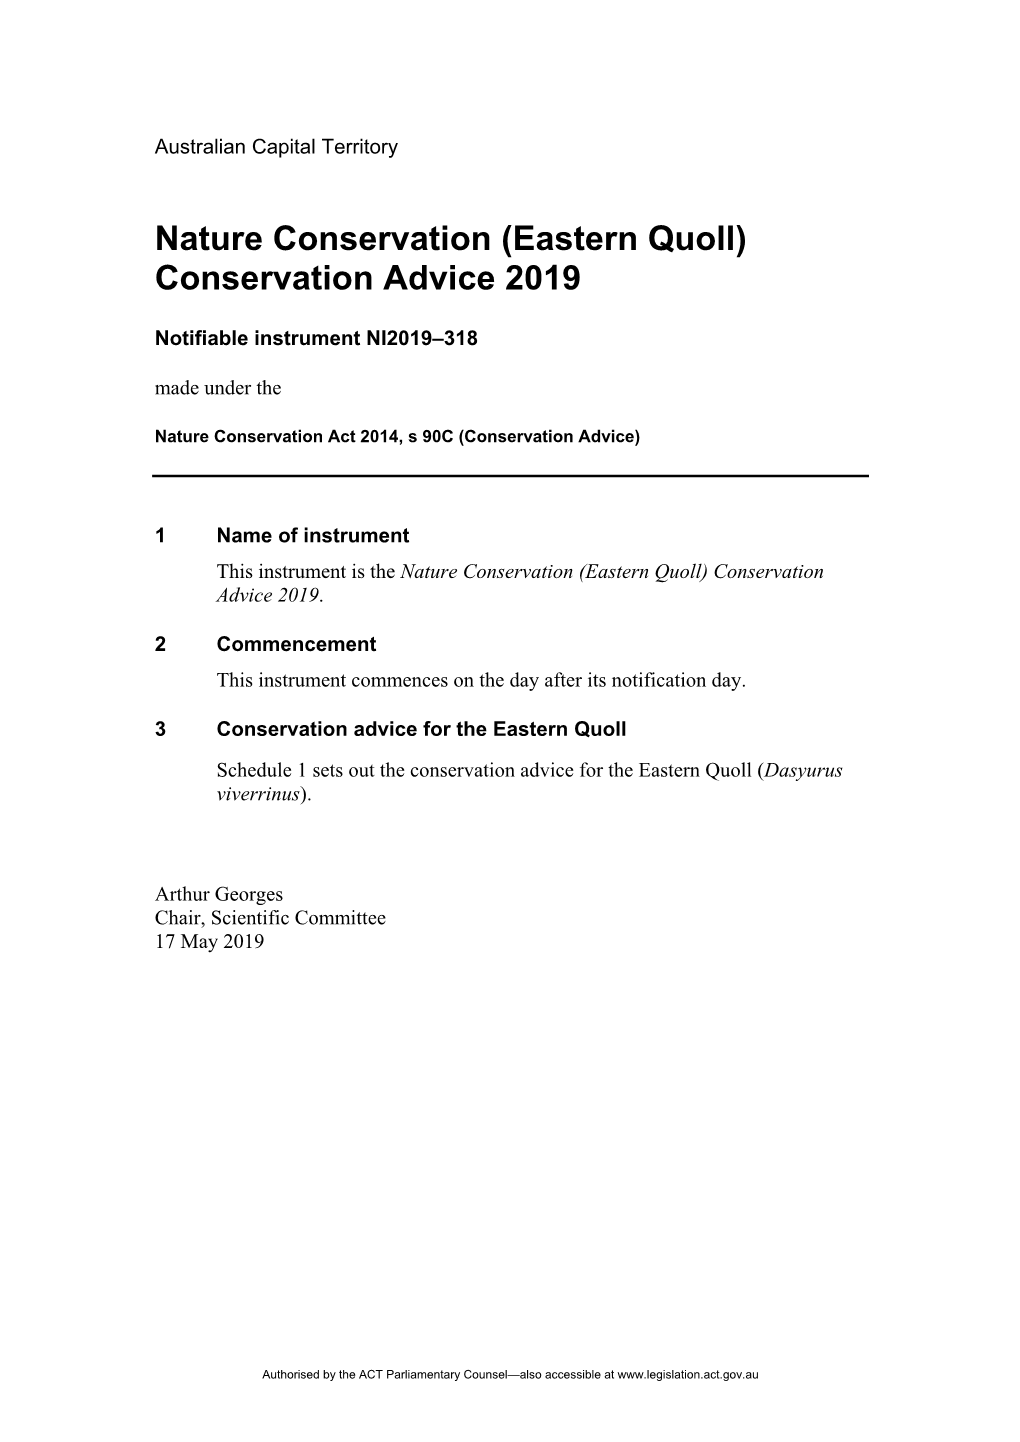 (Eastern Quoll) Conservation Advice 2019